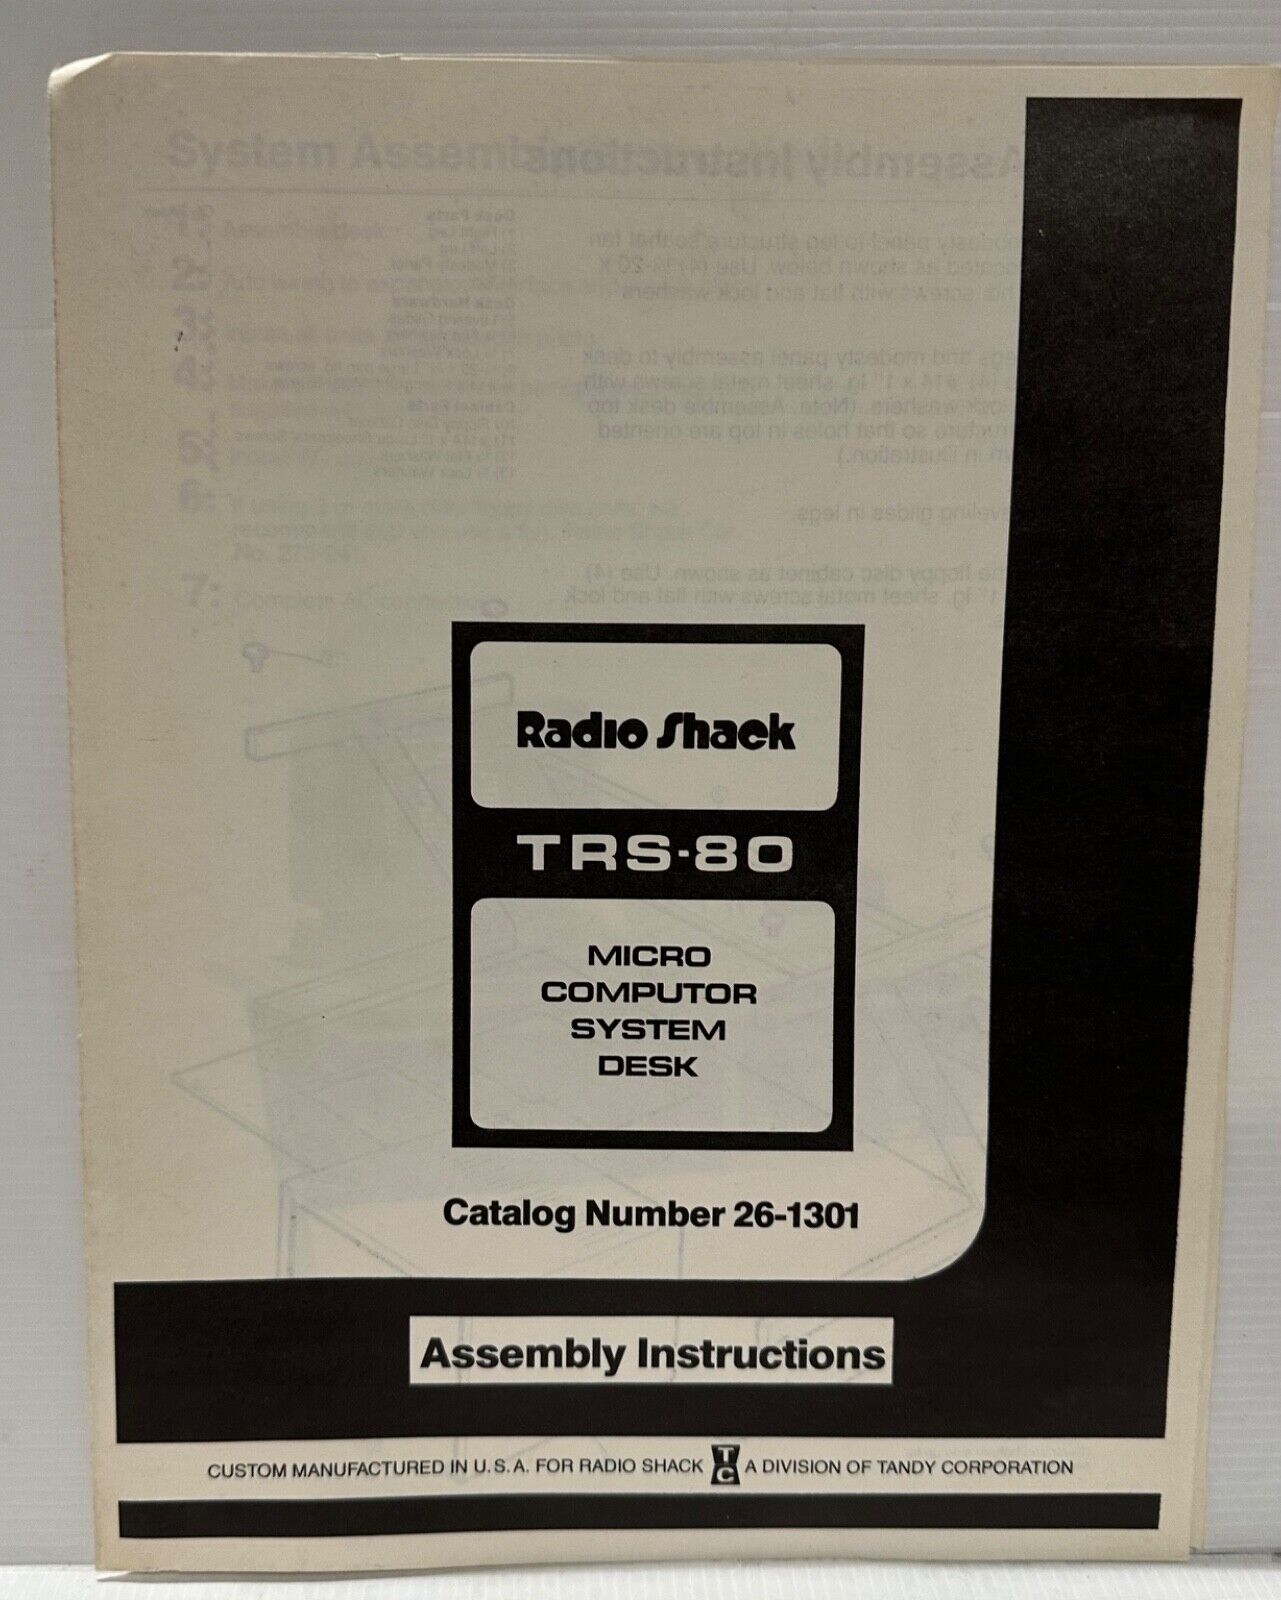 Radio Shack TRS-80 Micro Computer System Desk Assembly Instructions 26-1301